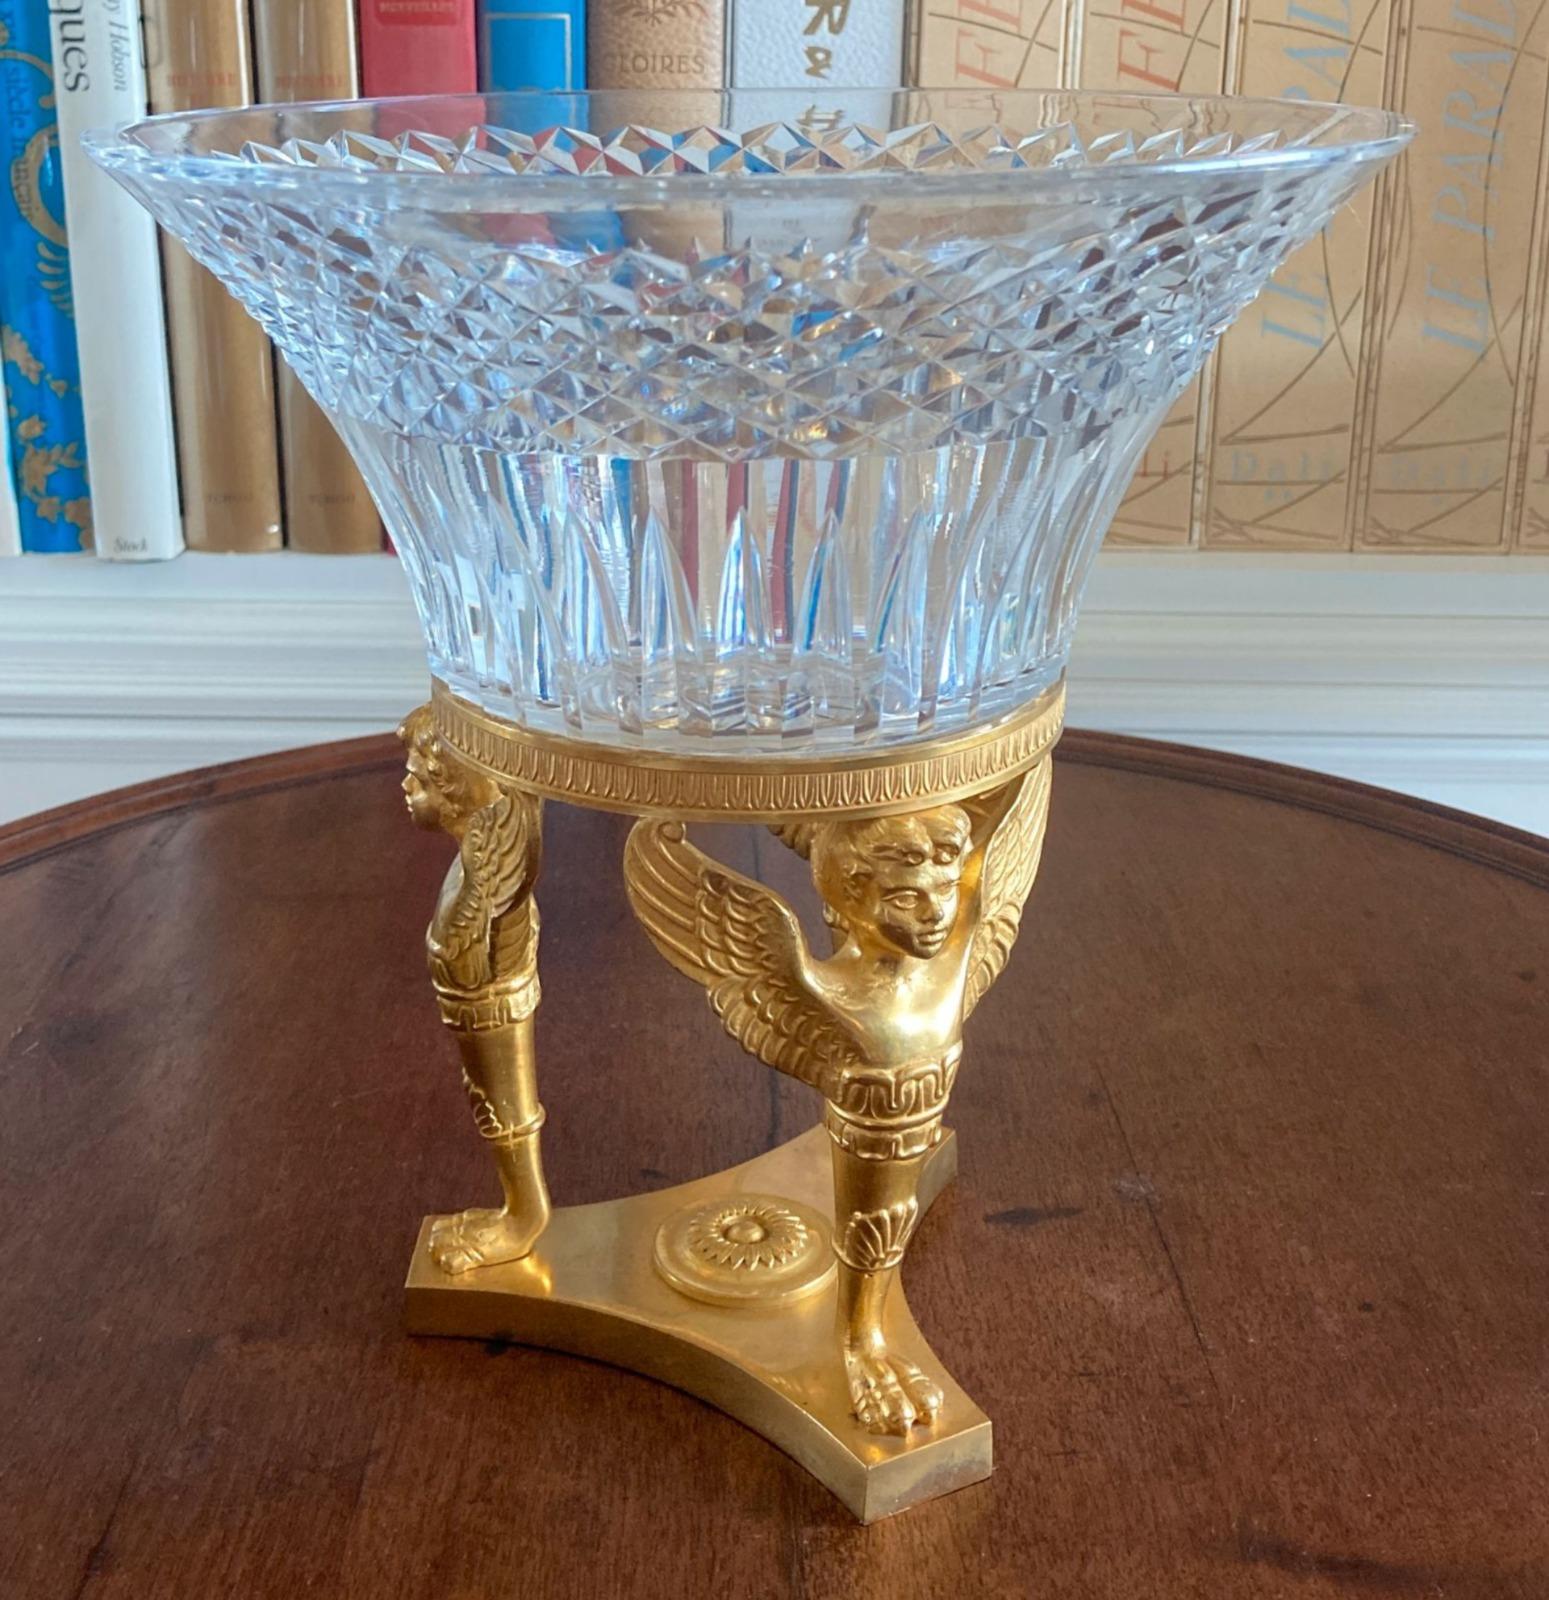 Large French Crystal Basket began 20th Century

blown and cut glass resting on an ormolu frame depicting cherubs standing on a sheathed claw foot.
30cm x 25
very good conditions